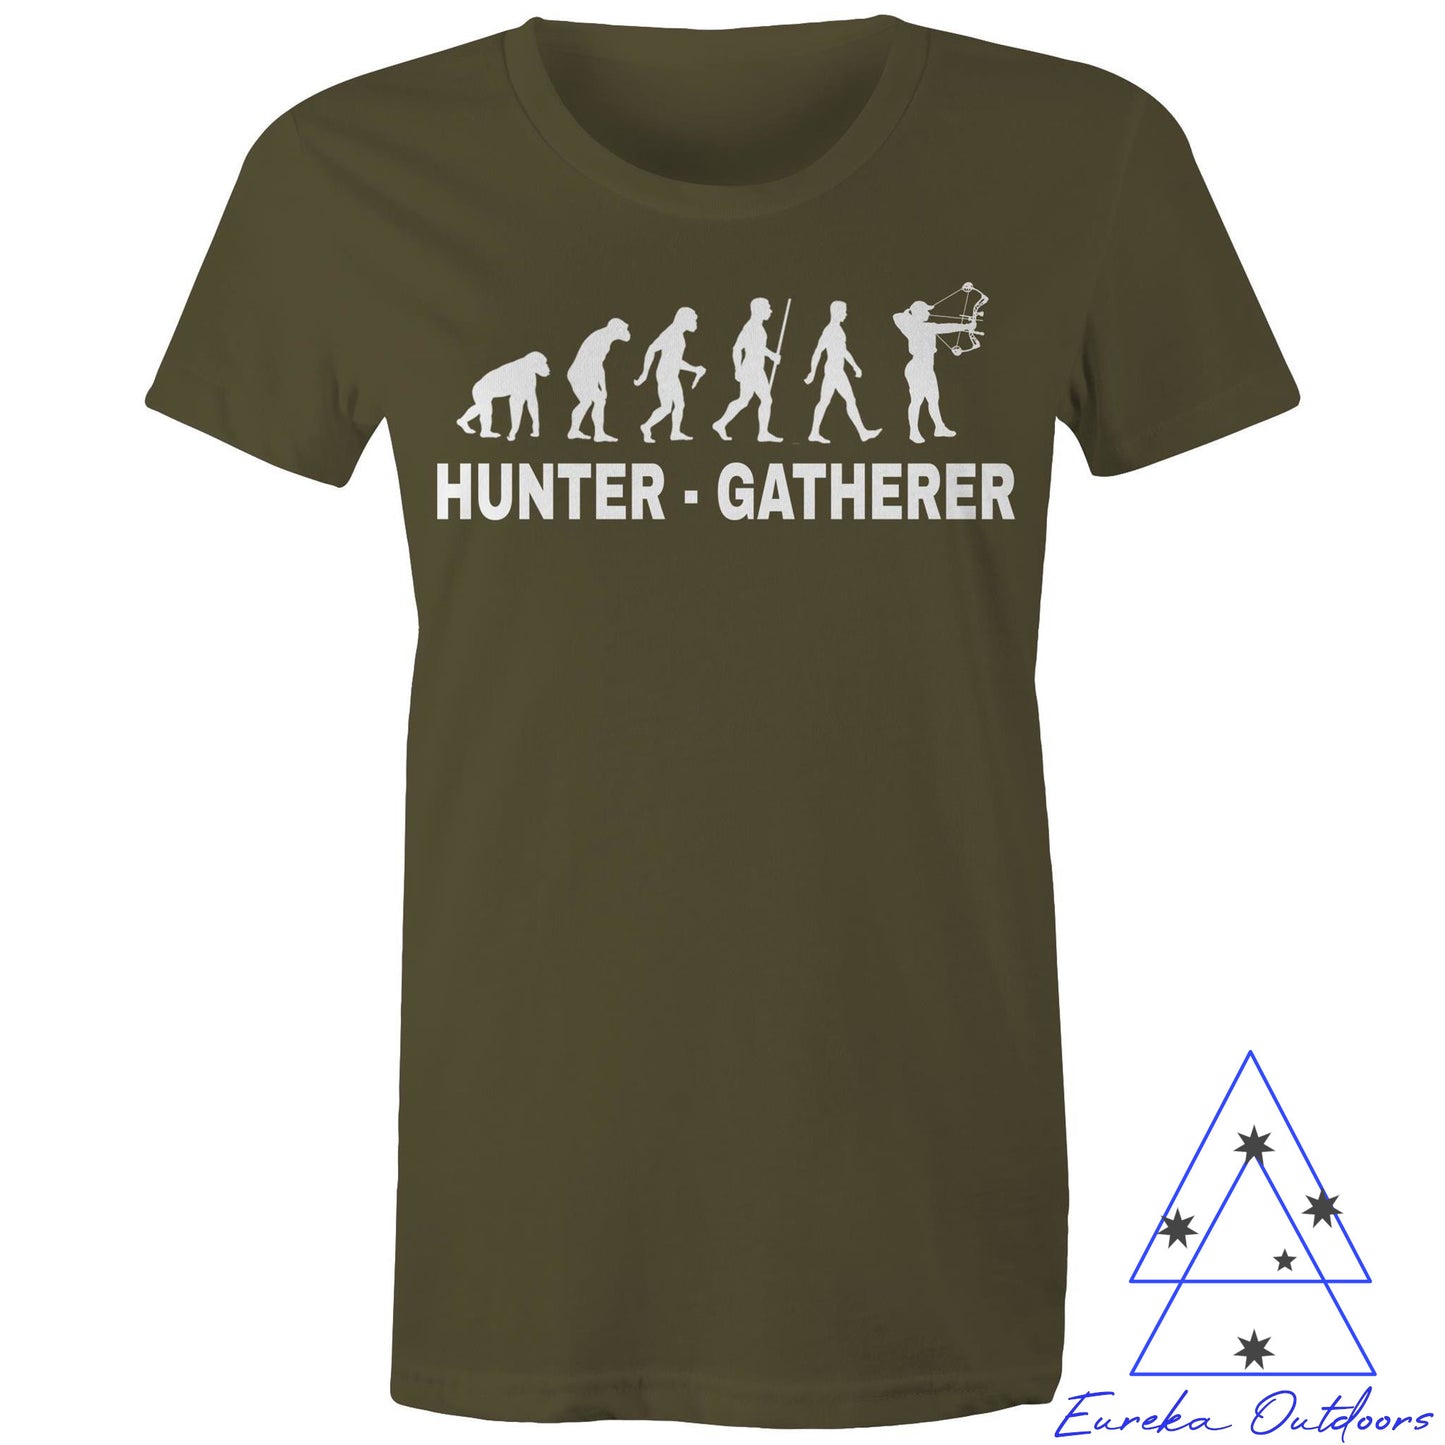 Hunter Gatherer - Bowhunting. AS Color 100% cotton womens maple tee. Now with female model.